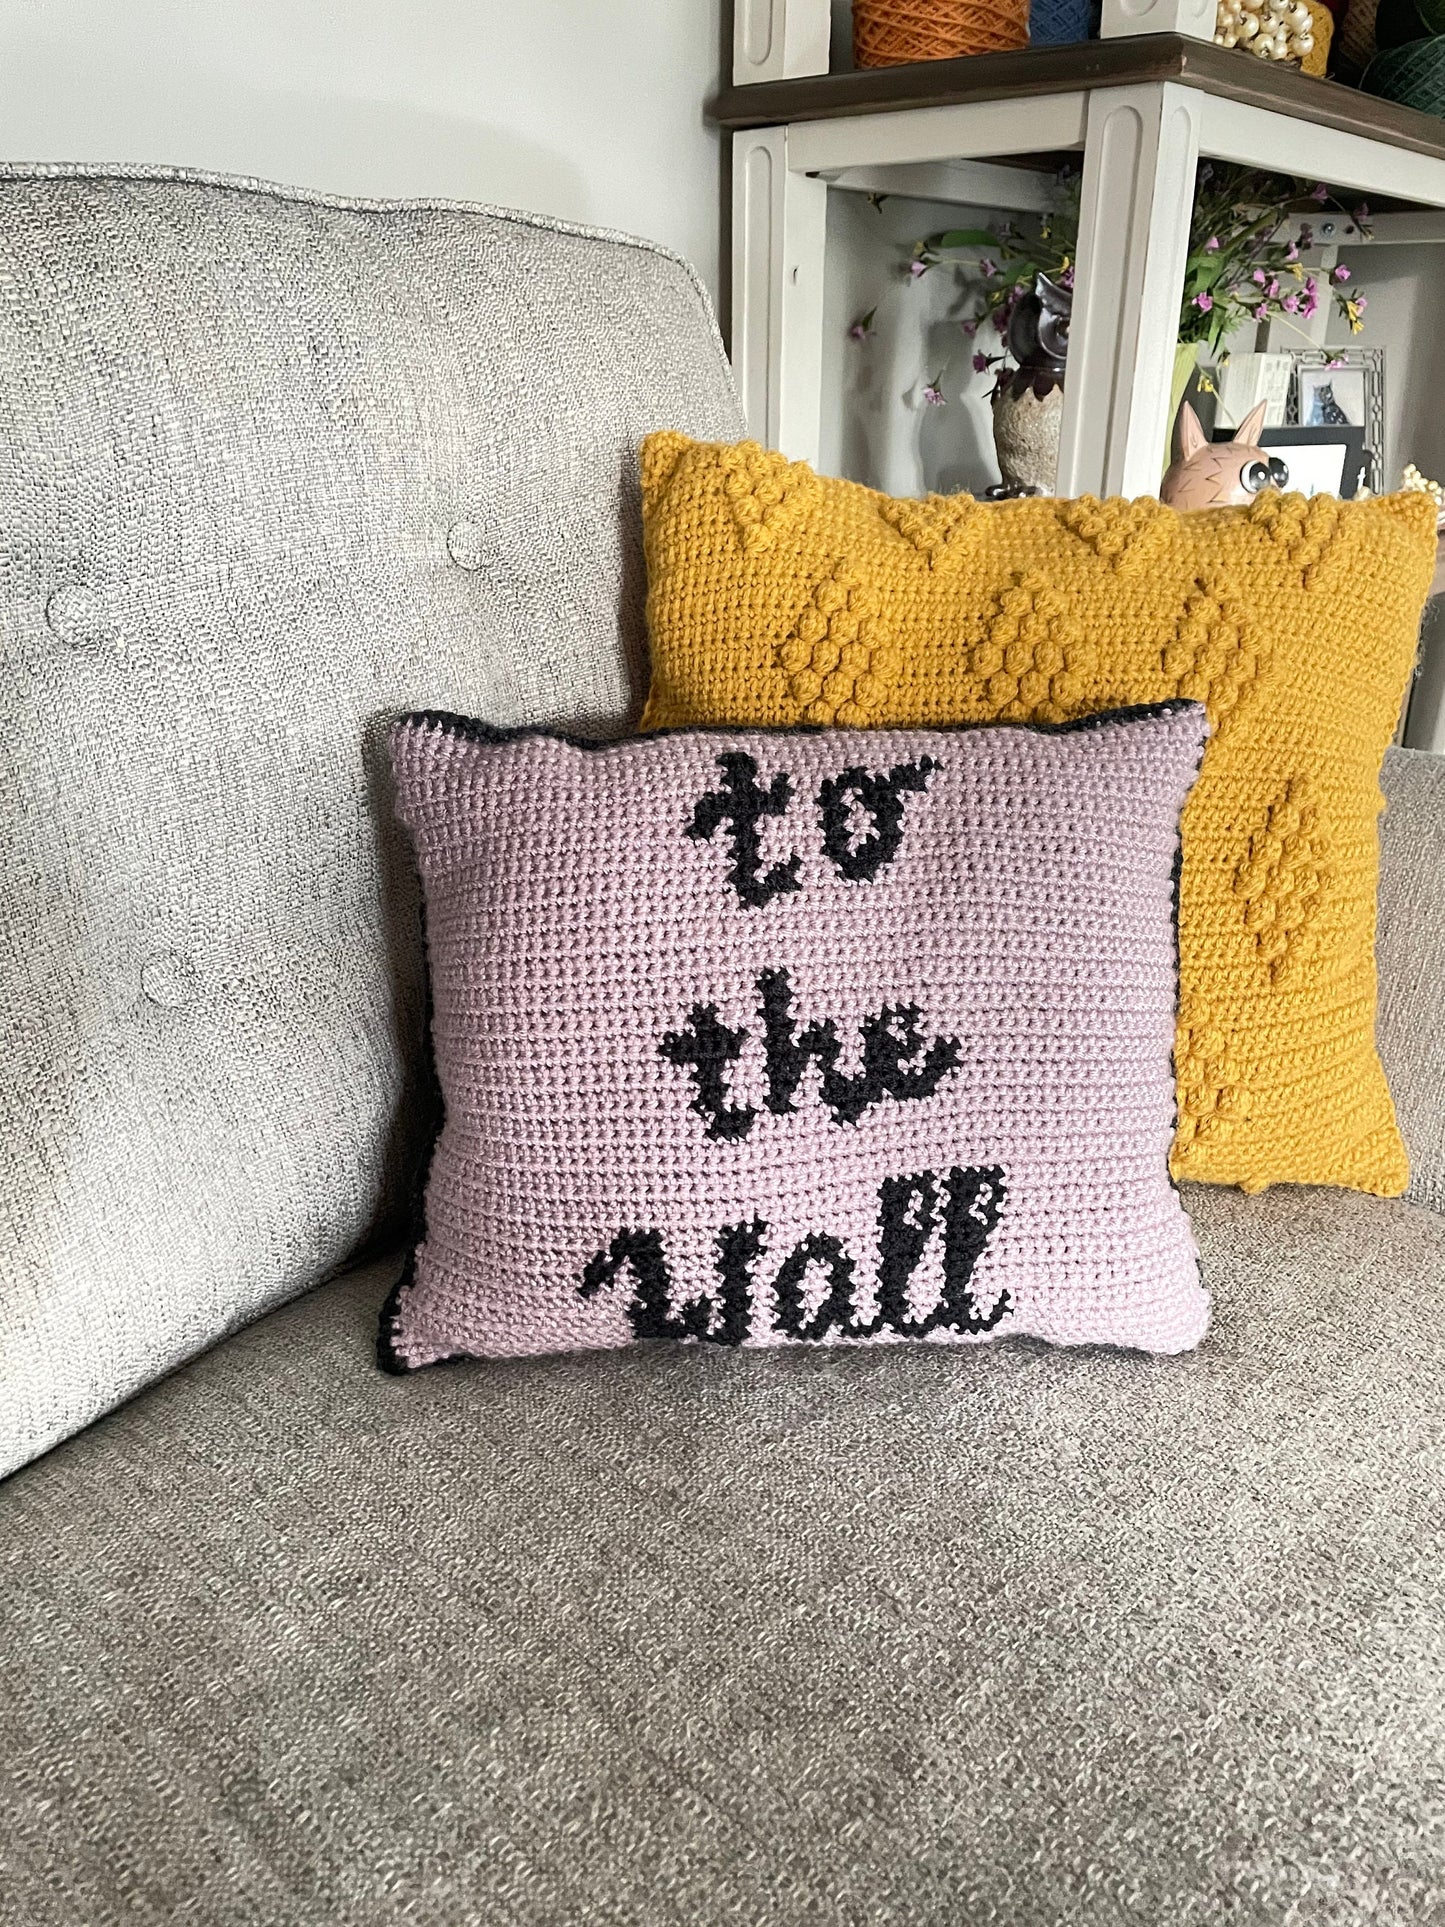 CROCHET PATTERN- Get Low Pillow Pattern, From the Window to the Wall Pillows